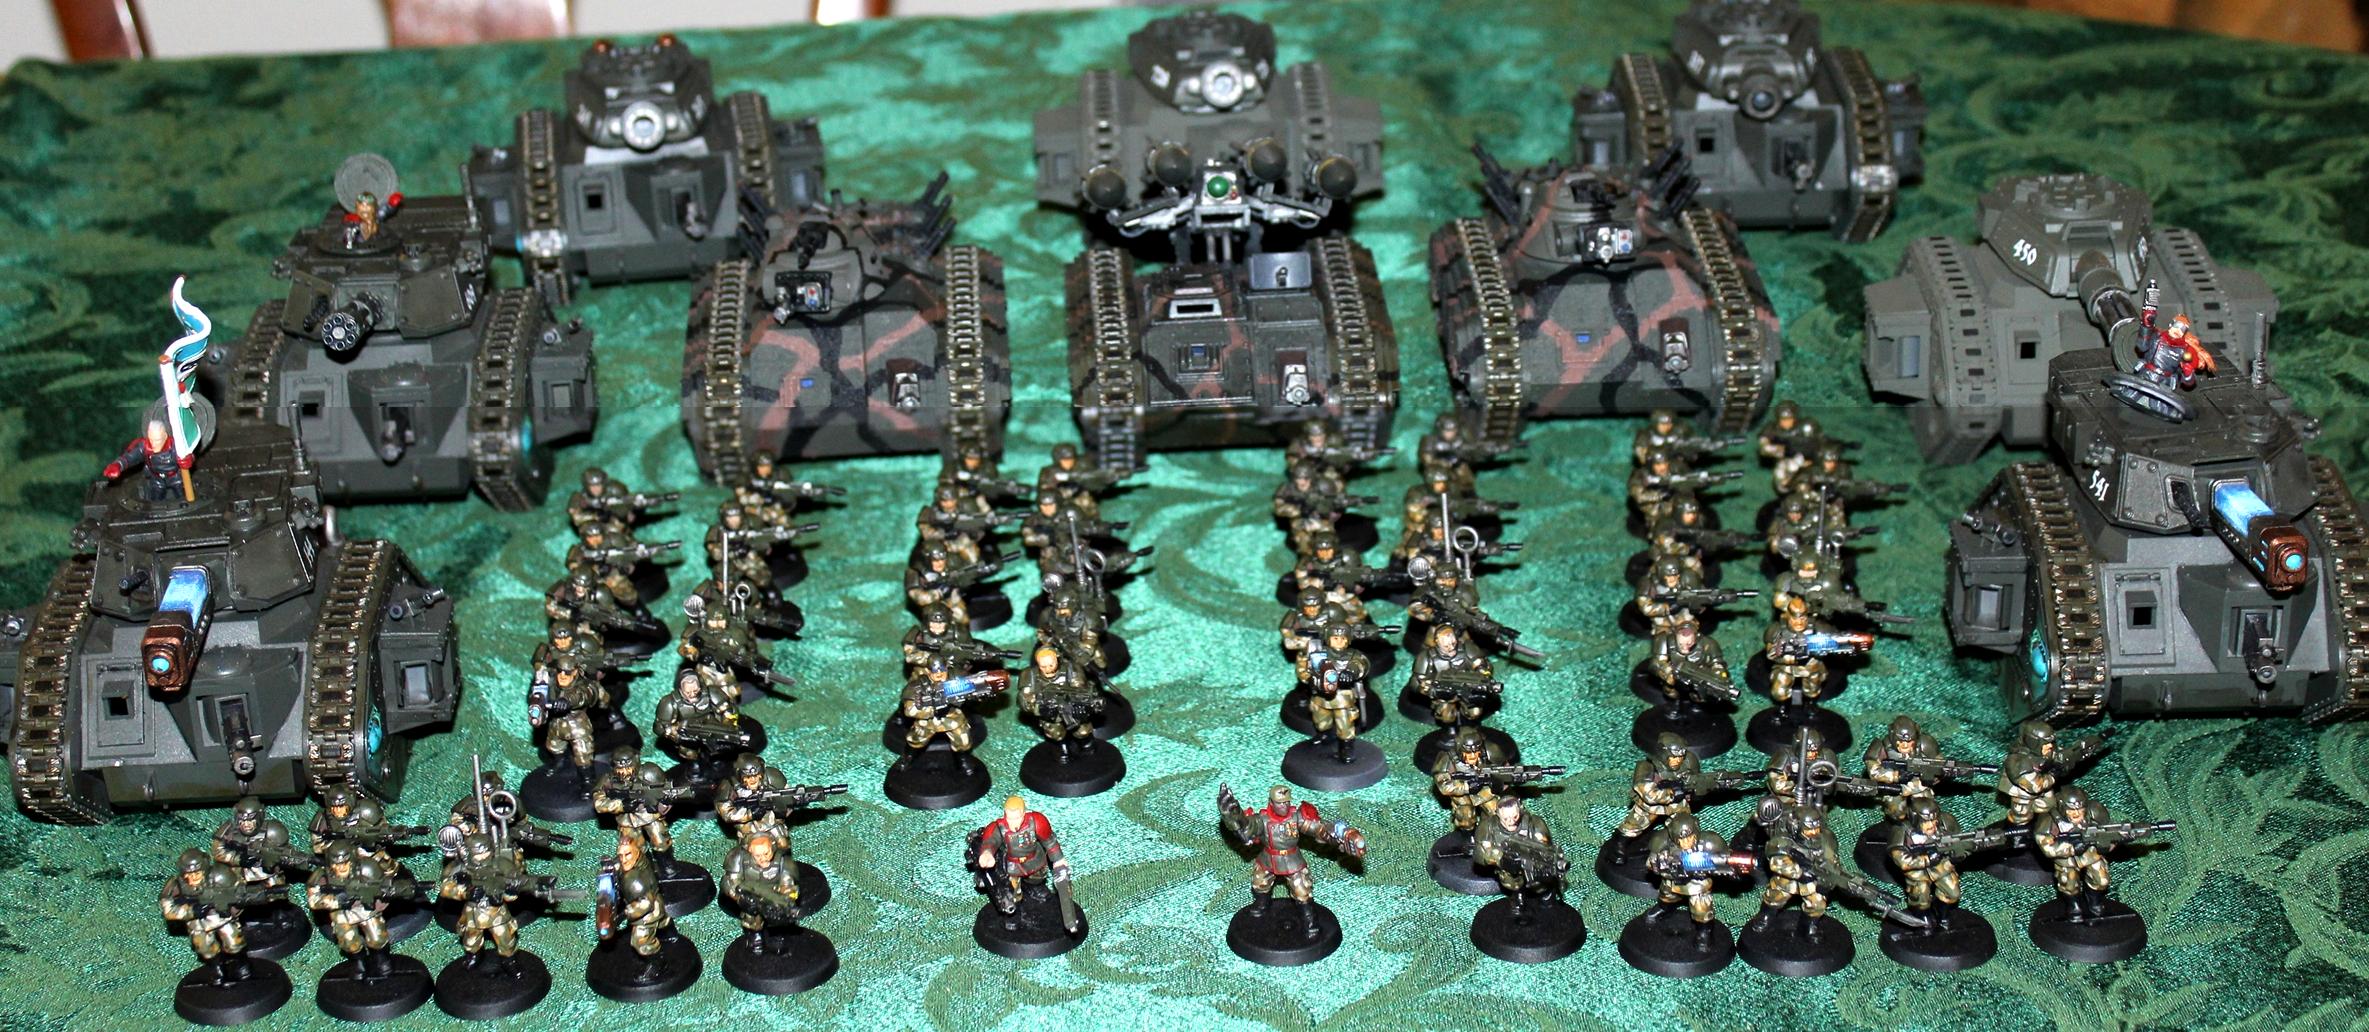 87th, Astra Militarum, Camouflage, Chimera, Deathstalkers, Fedrid, Forest, Guardsmen, Imperial Guard, Infantry, Leman Russ, Manticore, Tank Commander